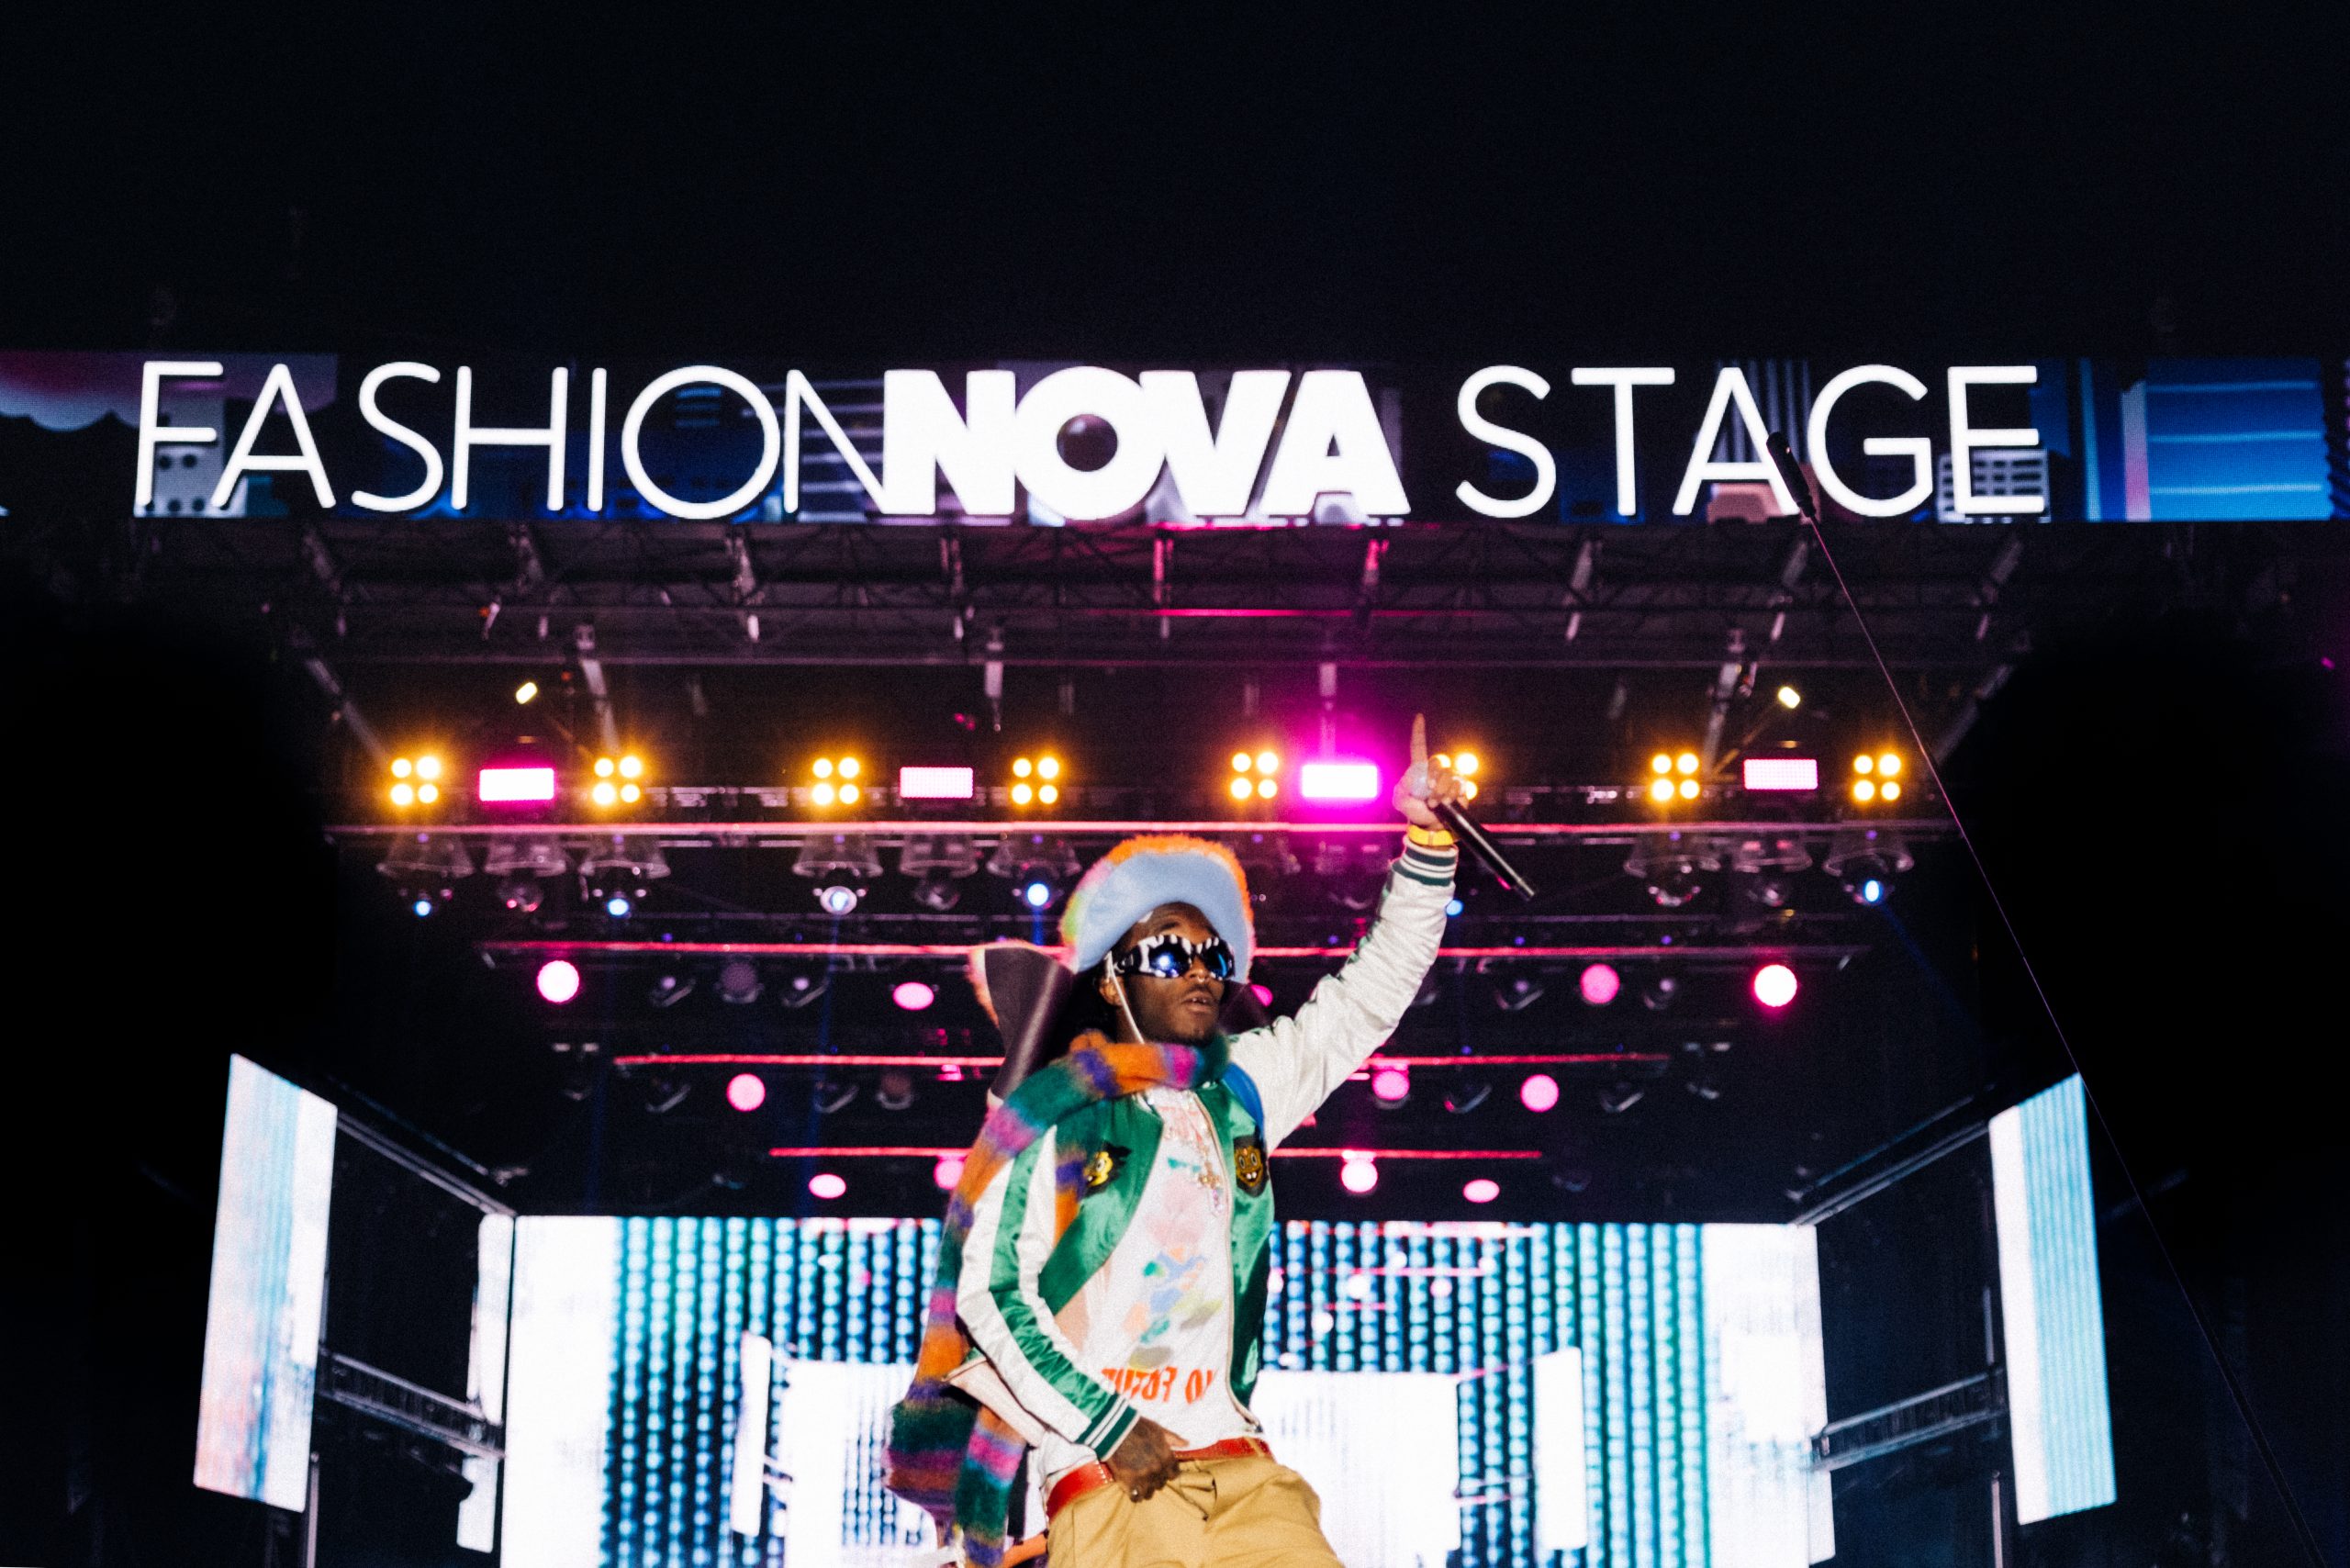 Lil Uzi Vert performs at the Fashion Nova Stage at Rolling Loud New York 2022 at Citi Field in Queens, New York on Sunday, September 25. PHOTO CREDIT: Meraki House for Fashion Nova